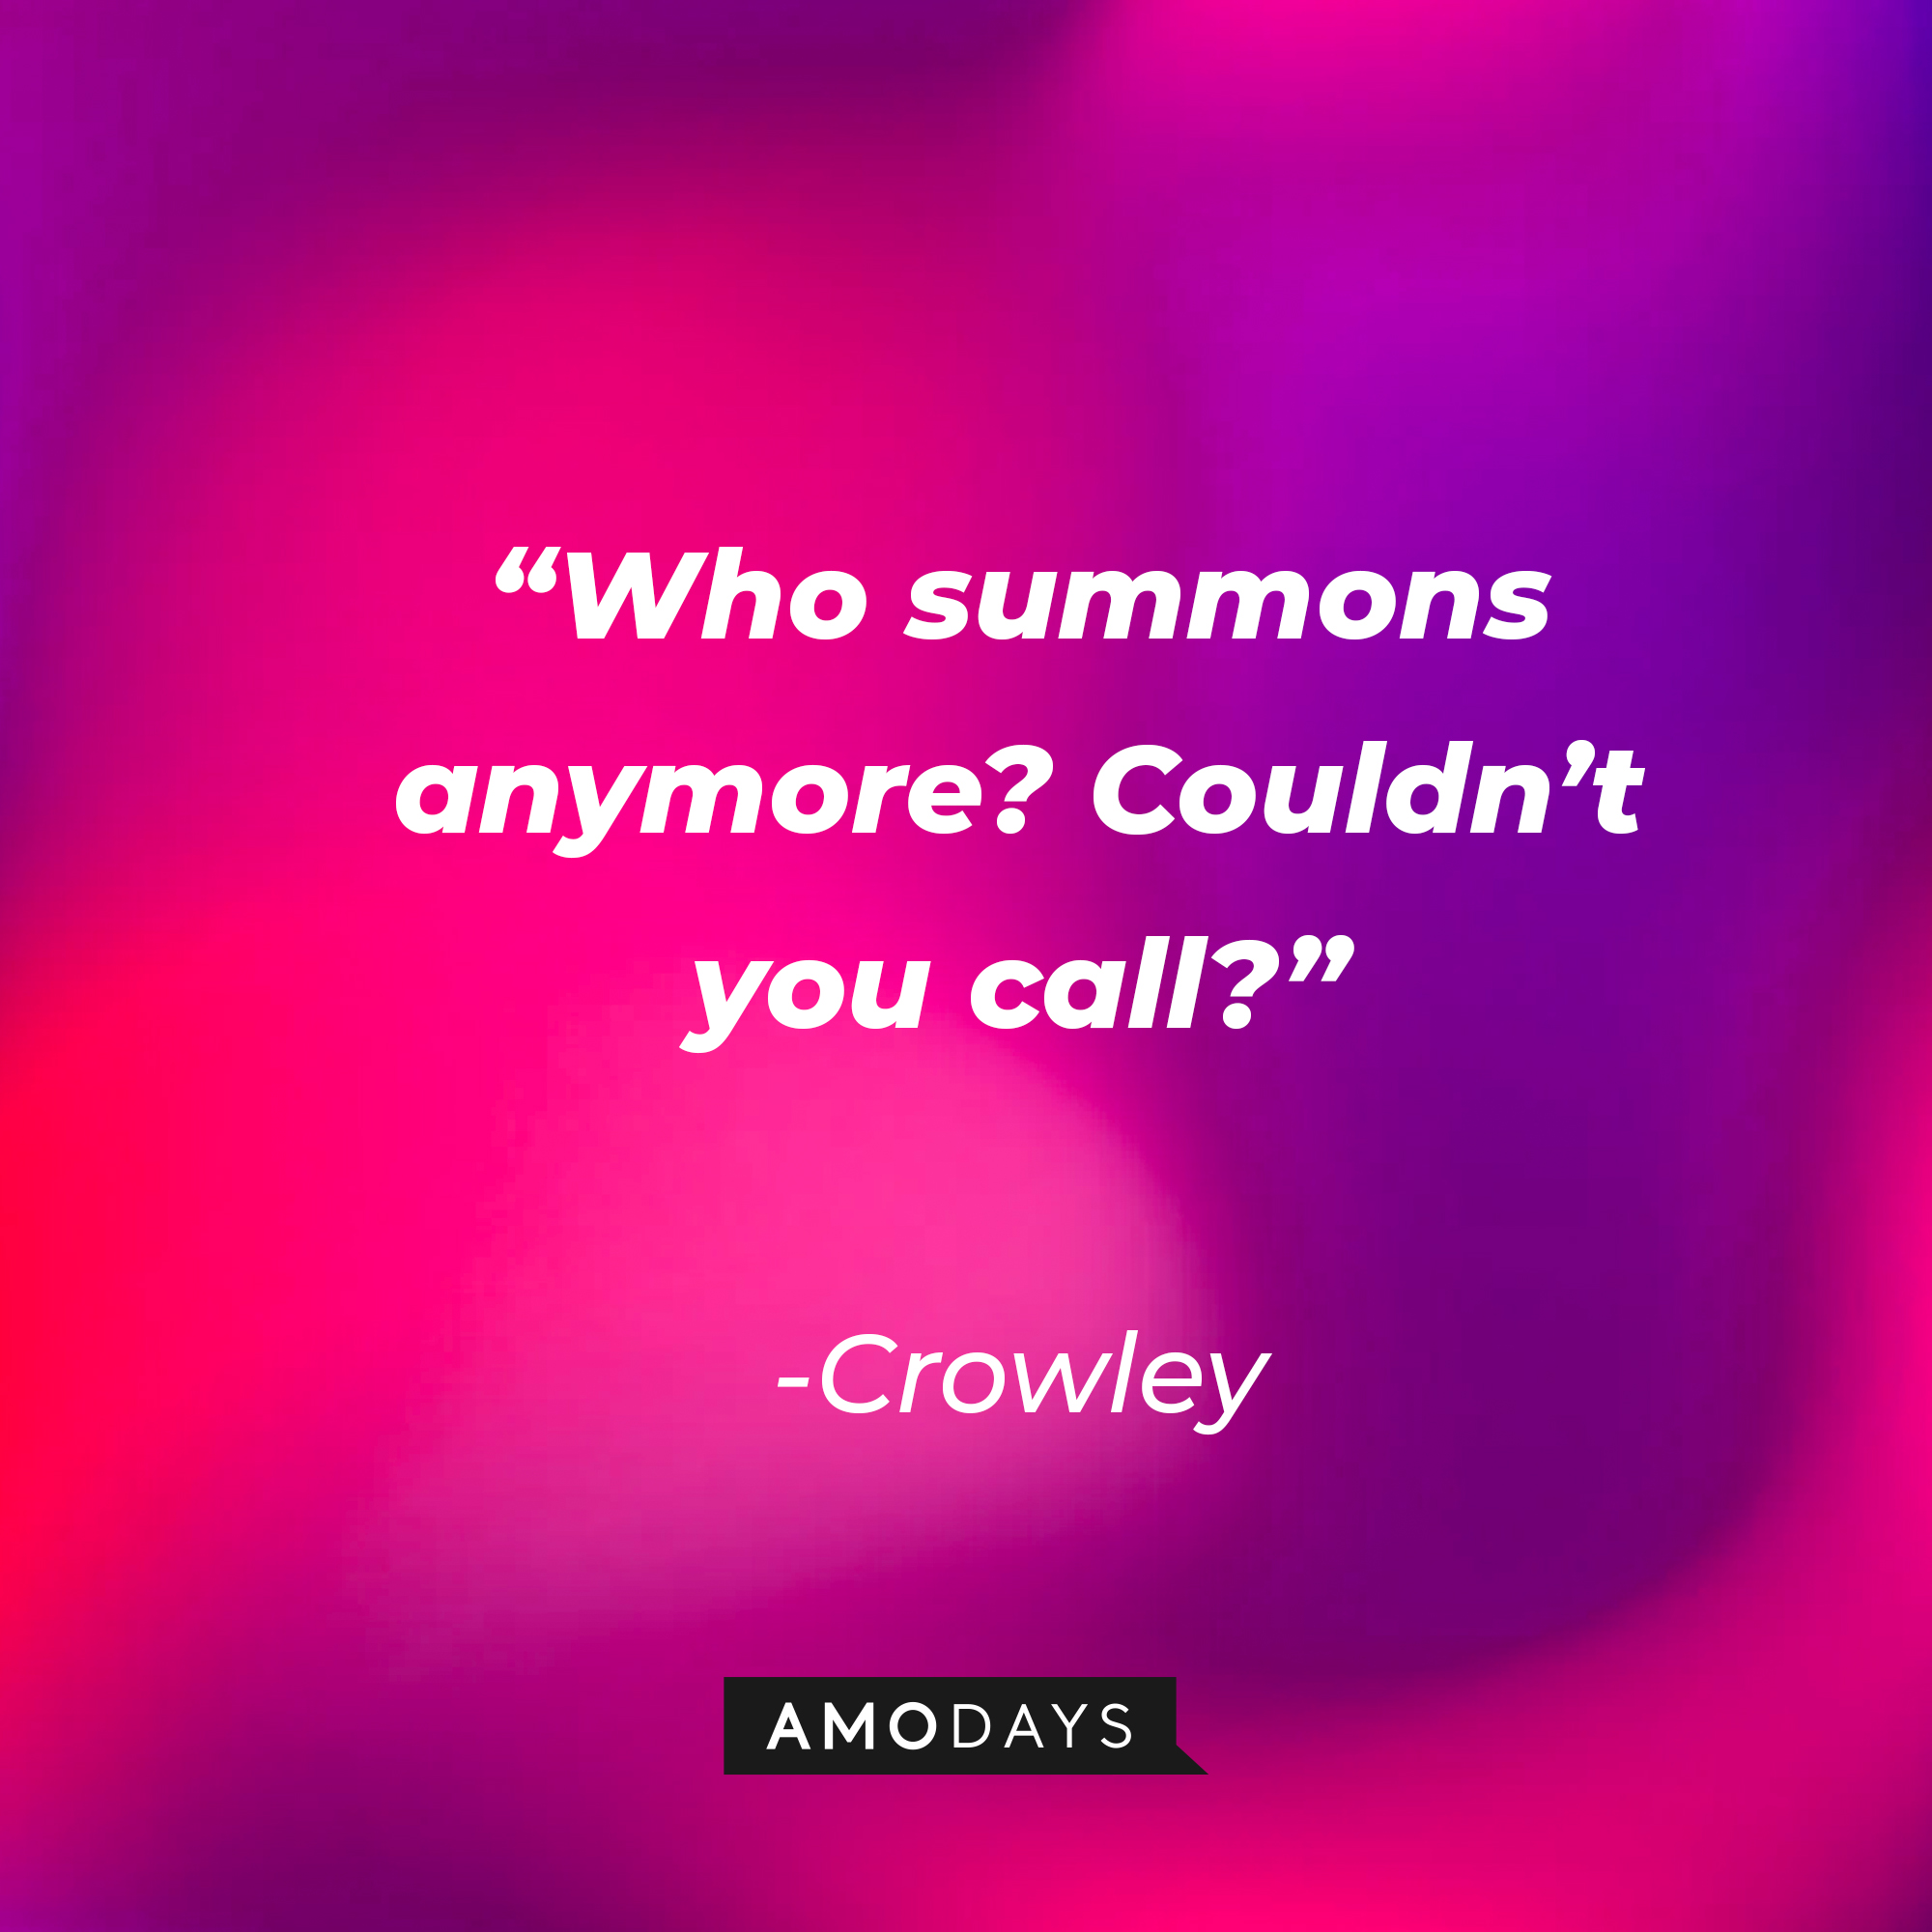 Crowley’s quote: “Who summons anymore? Couldn’t you call?” | Source: AmoDays